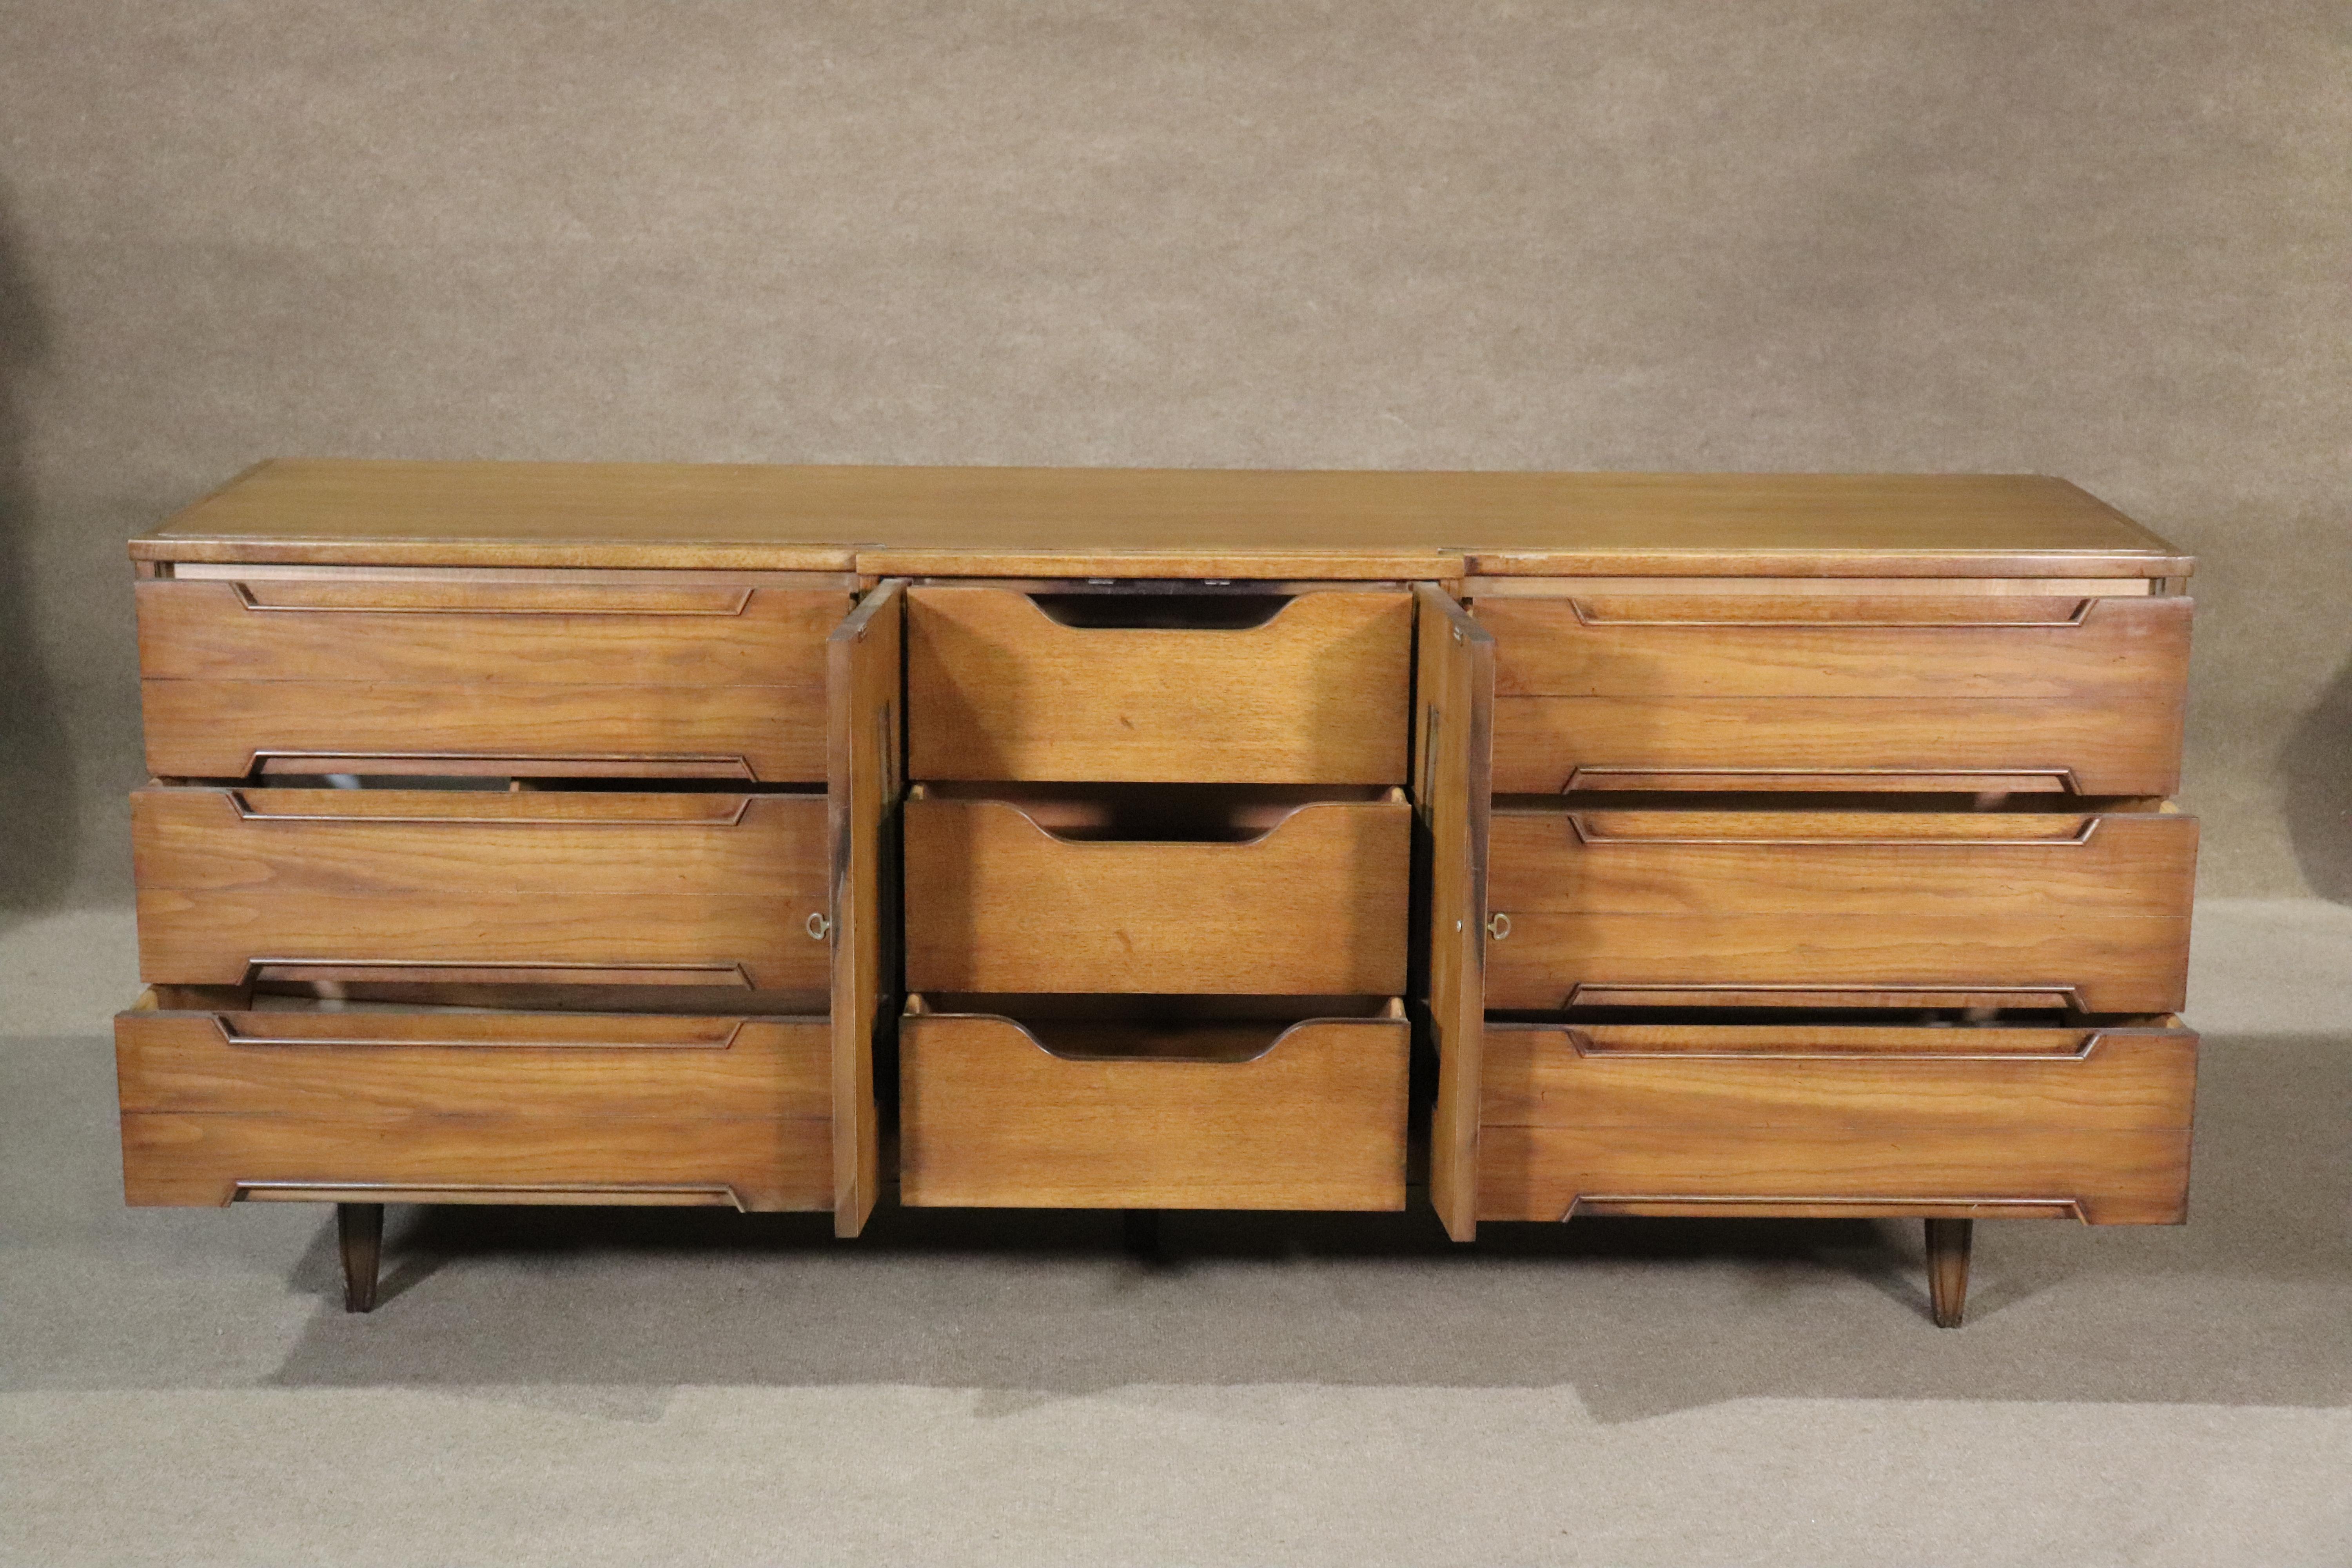 Long mid-century modern American dresser by Thomasville. Simple and handsome design with walnut wood grain. Nine total drawers with wood trim around the handles.
Please confirm location NY or NJ